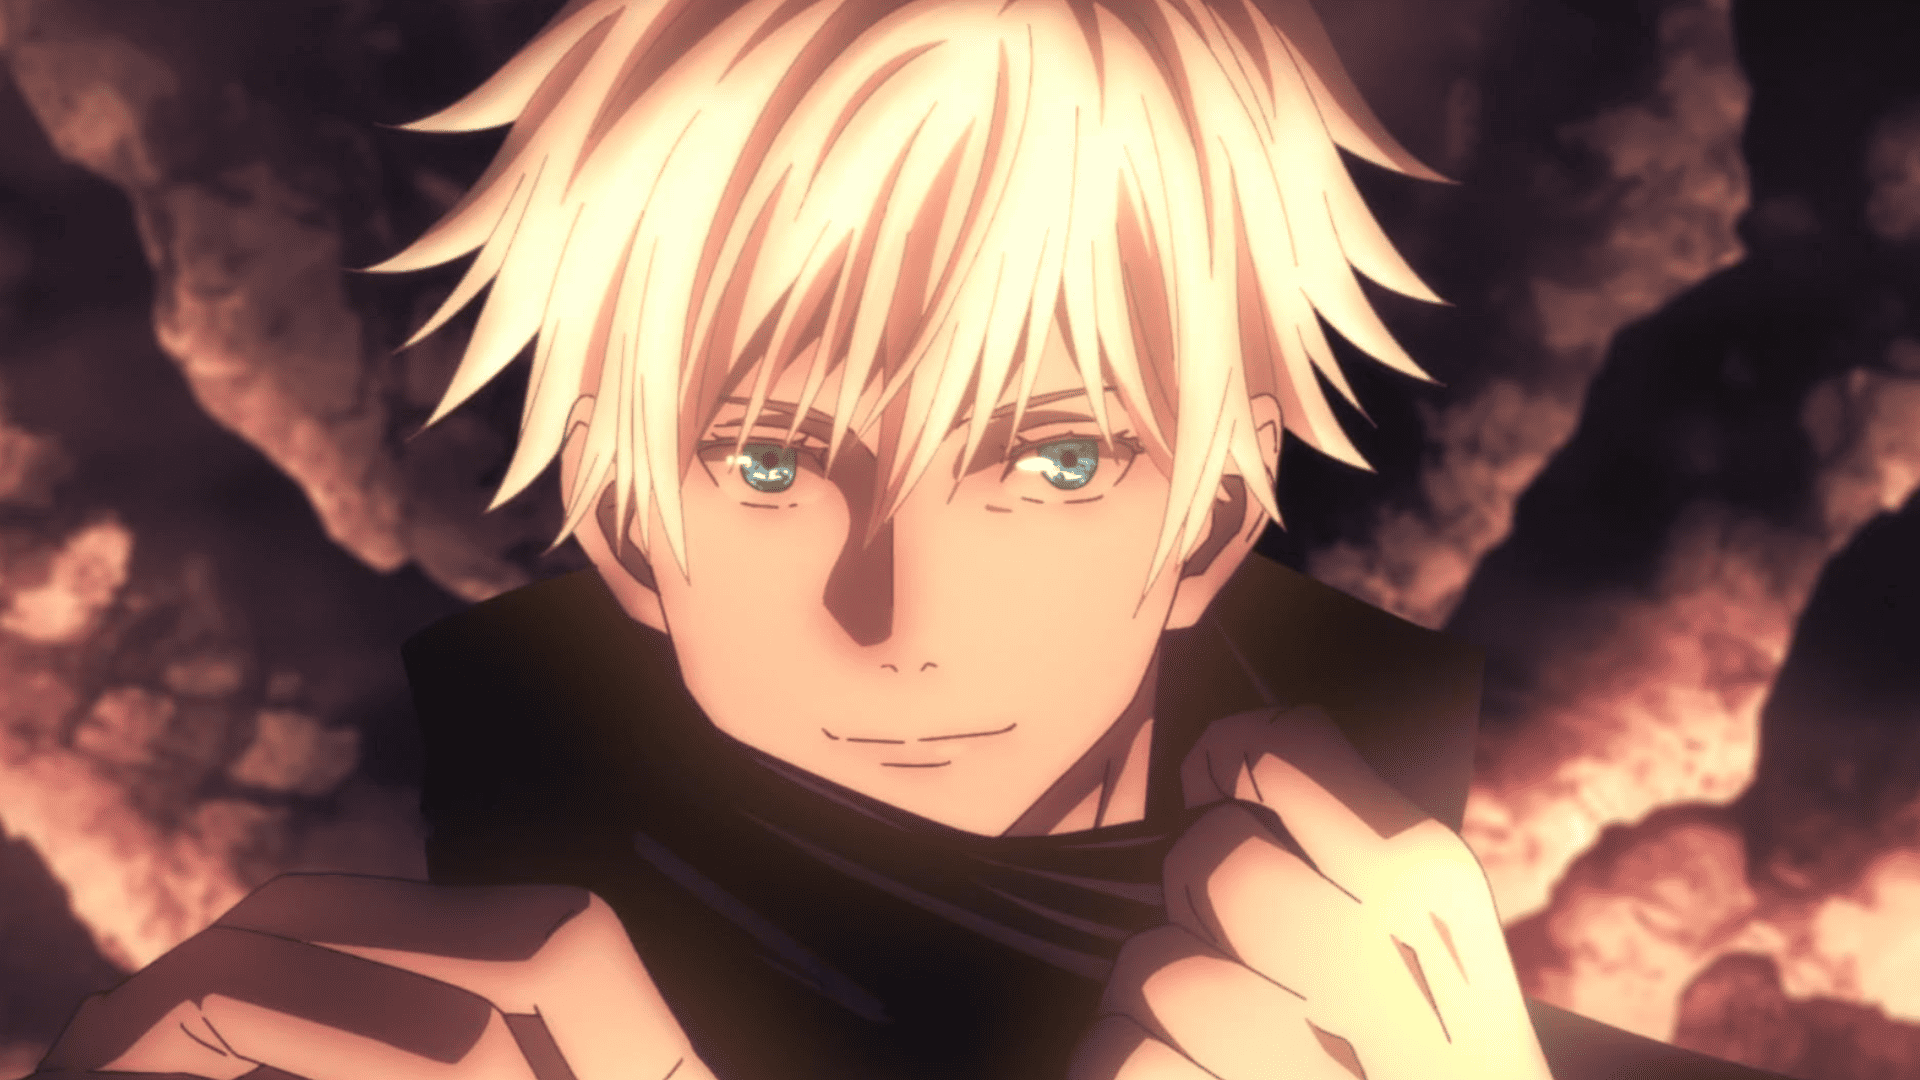 An animated man reveals his beautiful crystal blue eyes in this image from MAPPA.